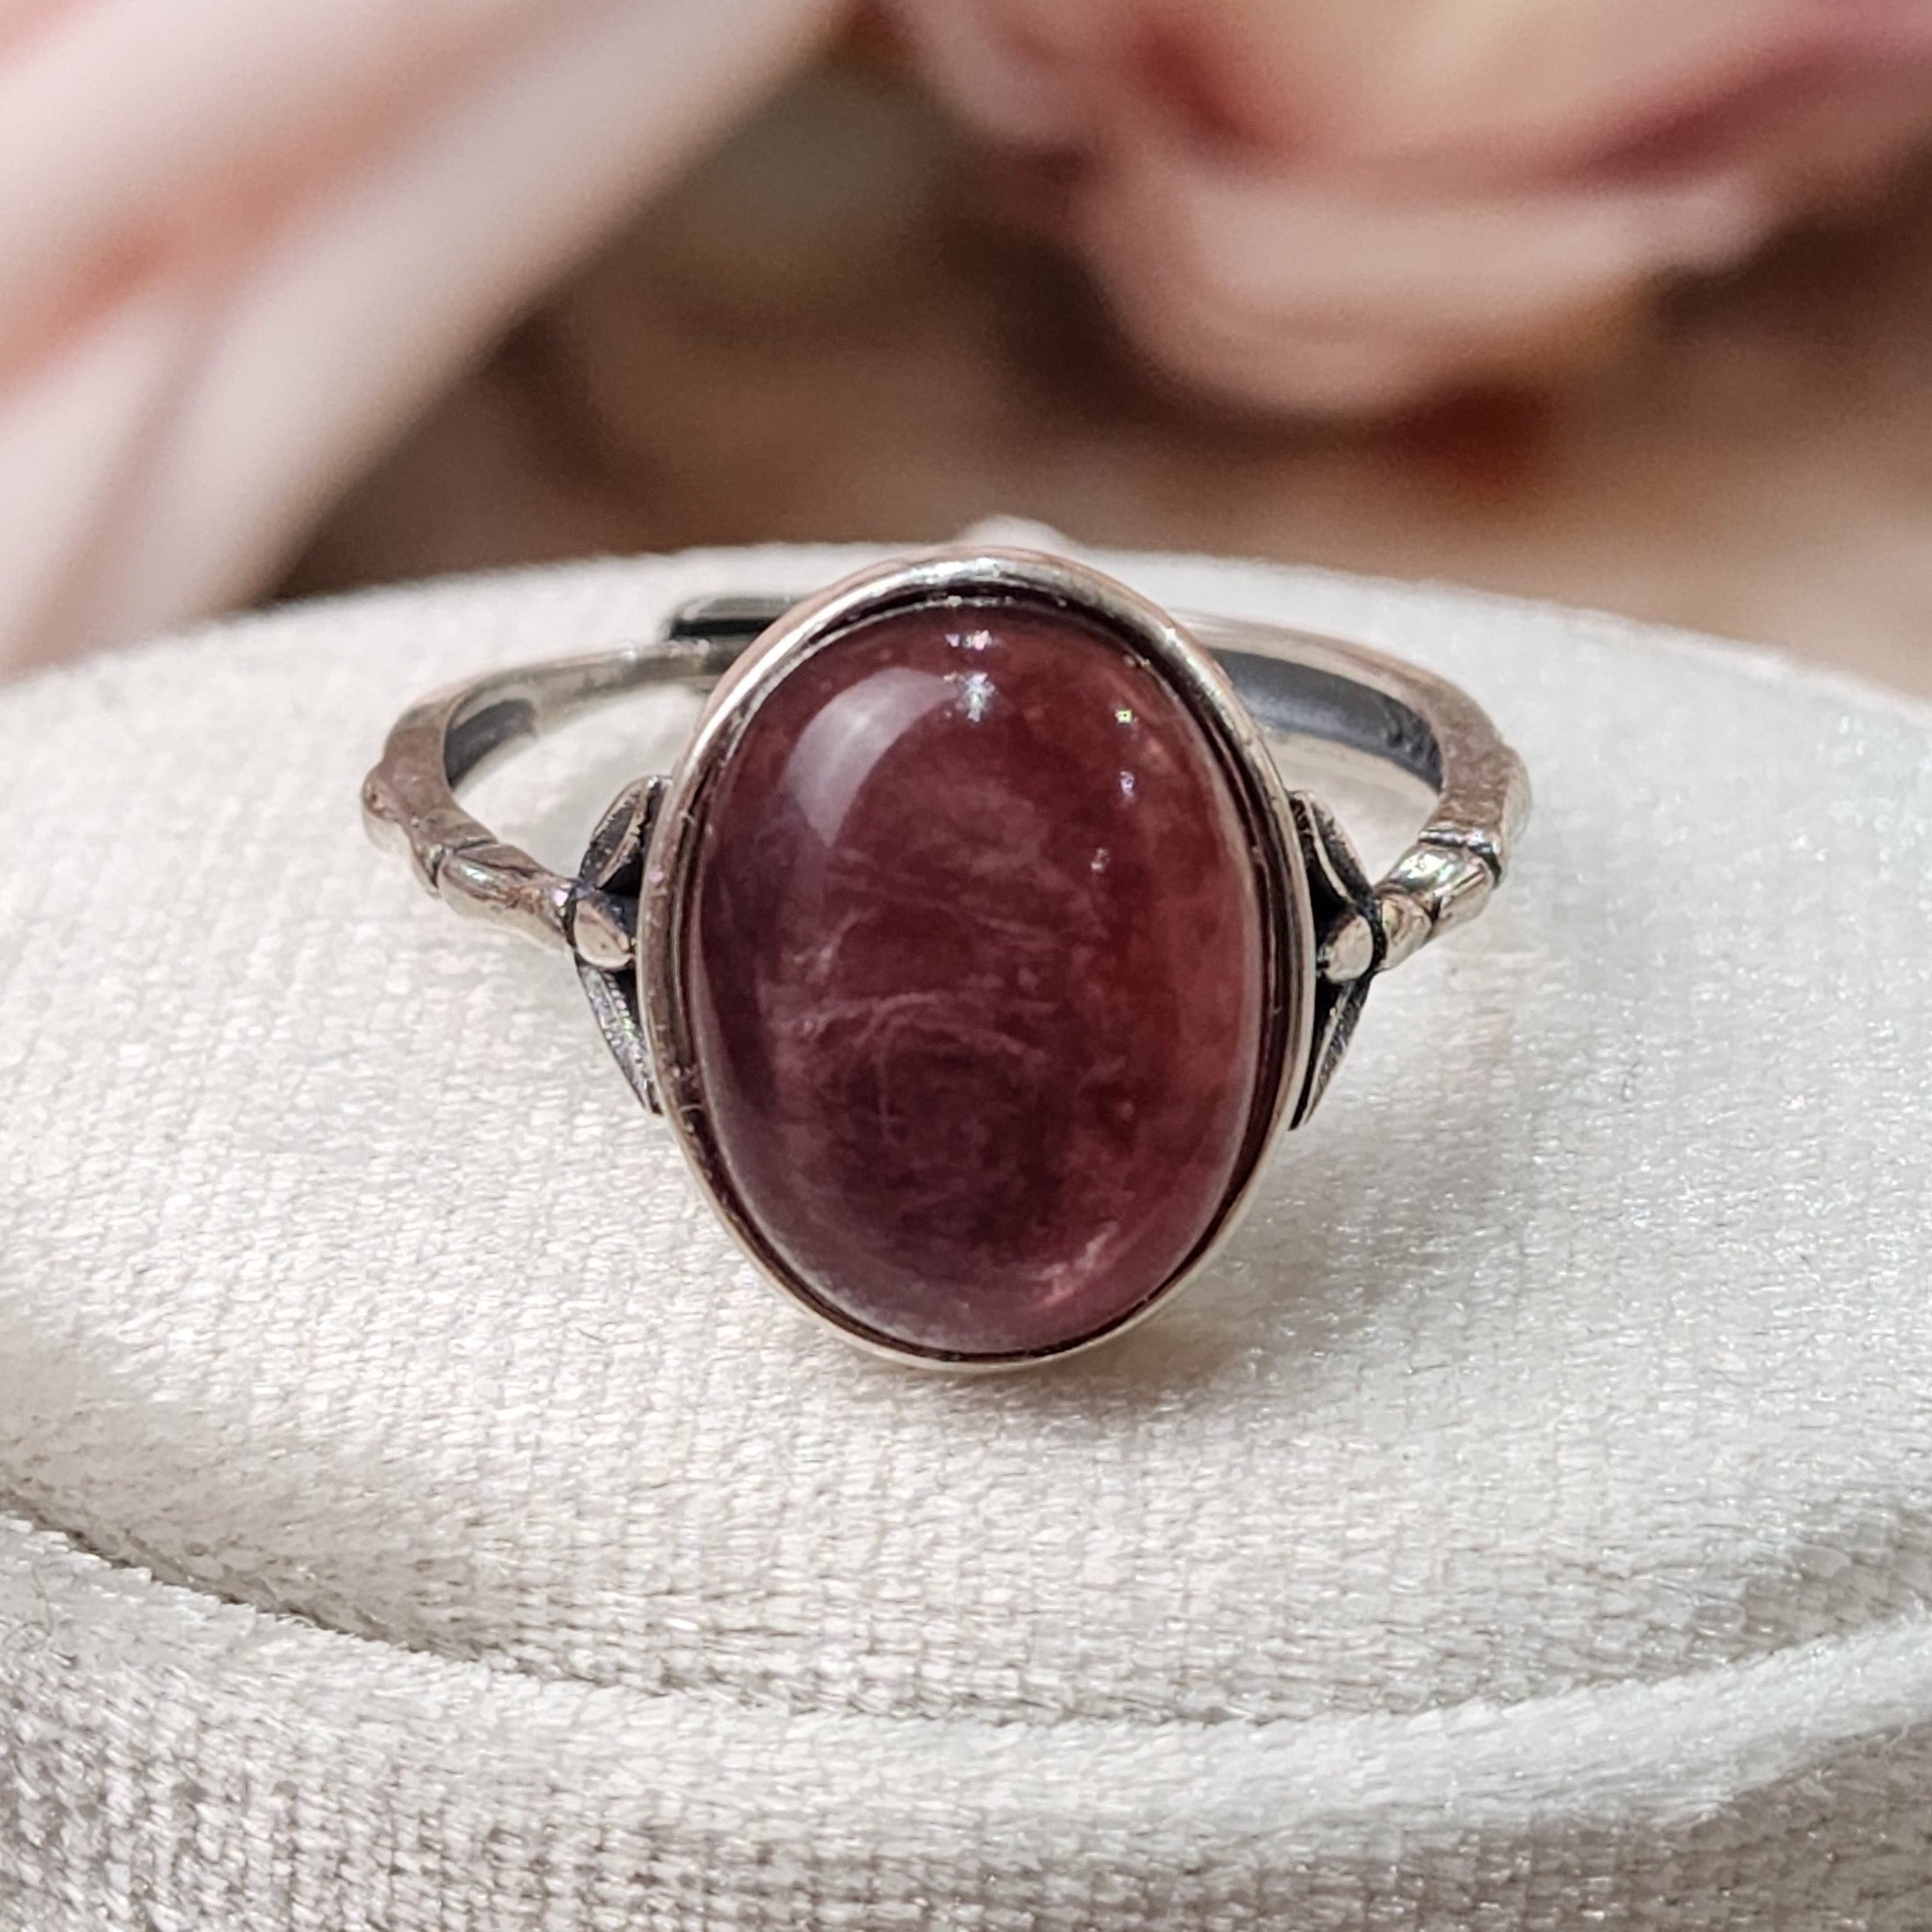 Gem Lepidolite Vintage Style Adjustable Ring .925 Silver for Anxiety Support, Joy and Stress Relief